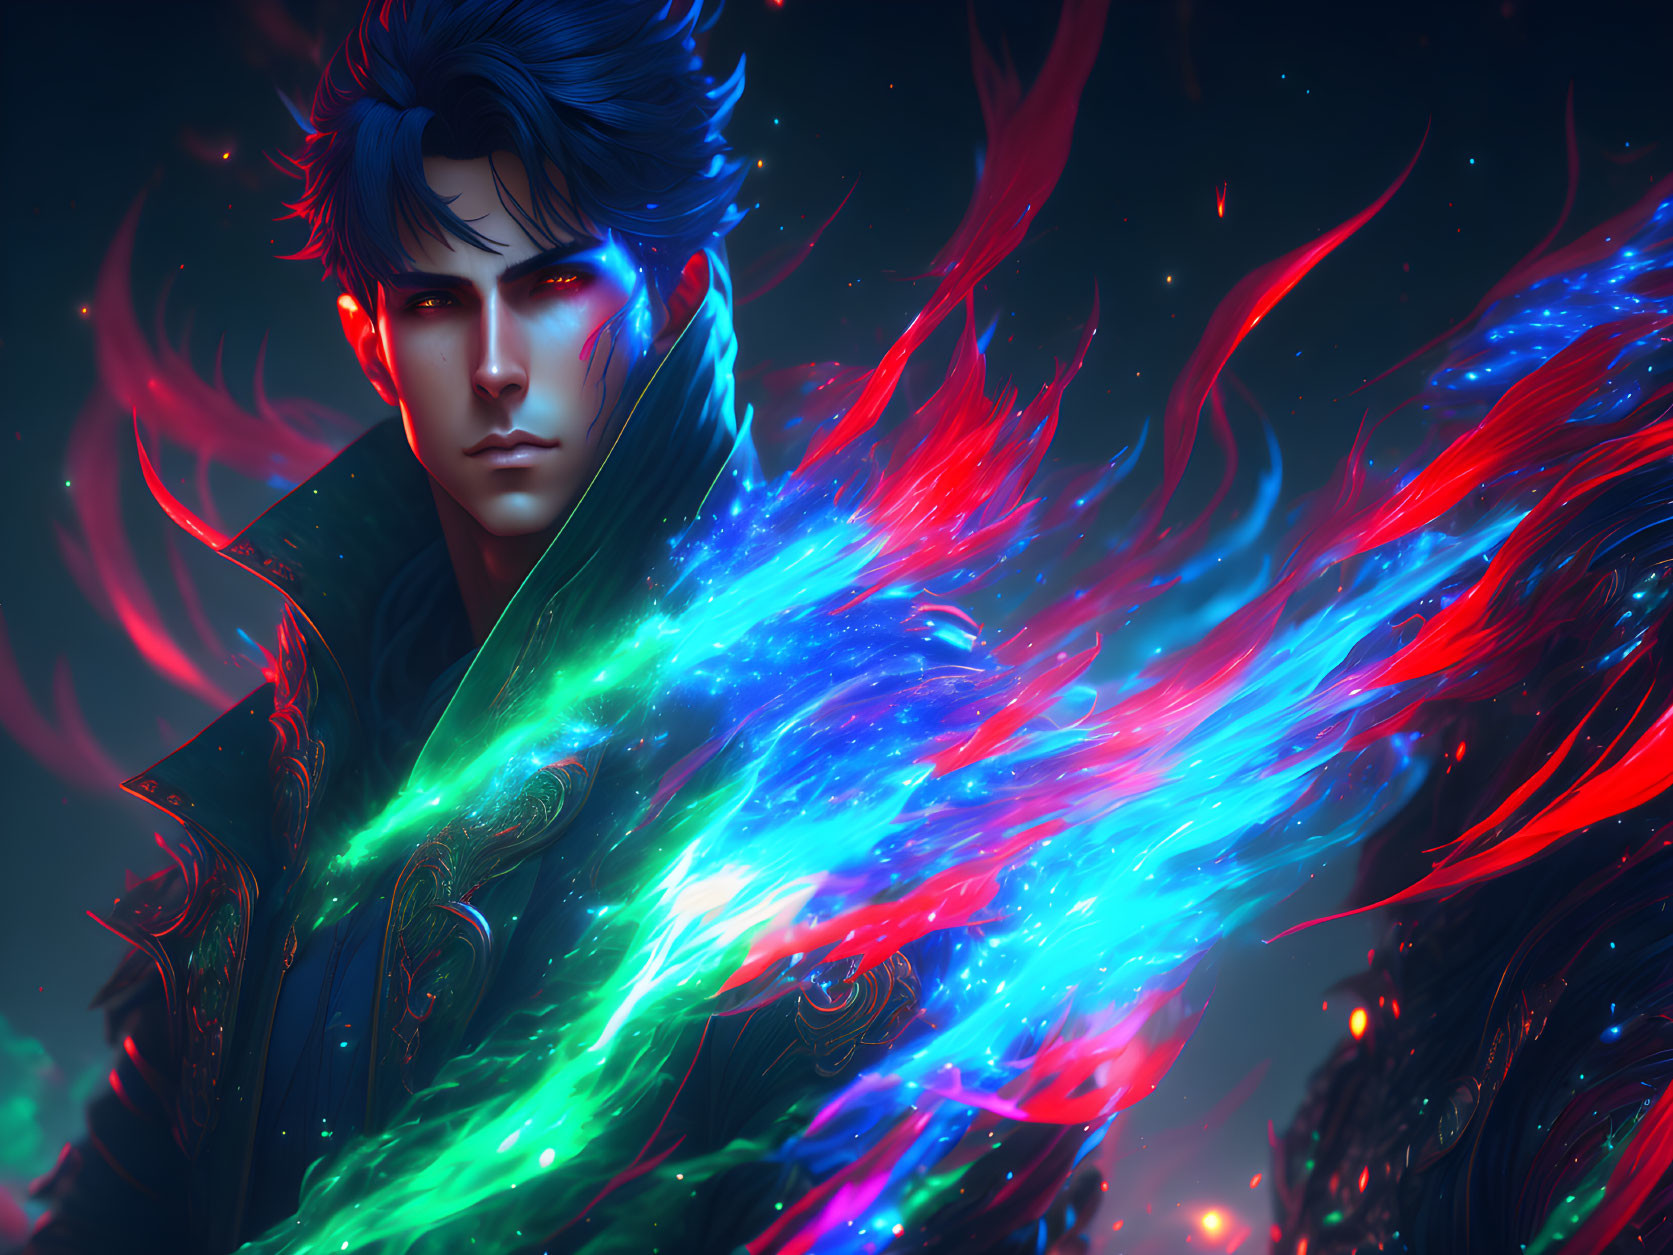 Vibrant digital artwork: person with blue hair and intense gaze engulfed by blue and red flames